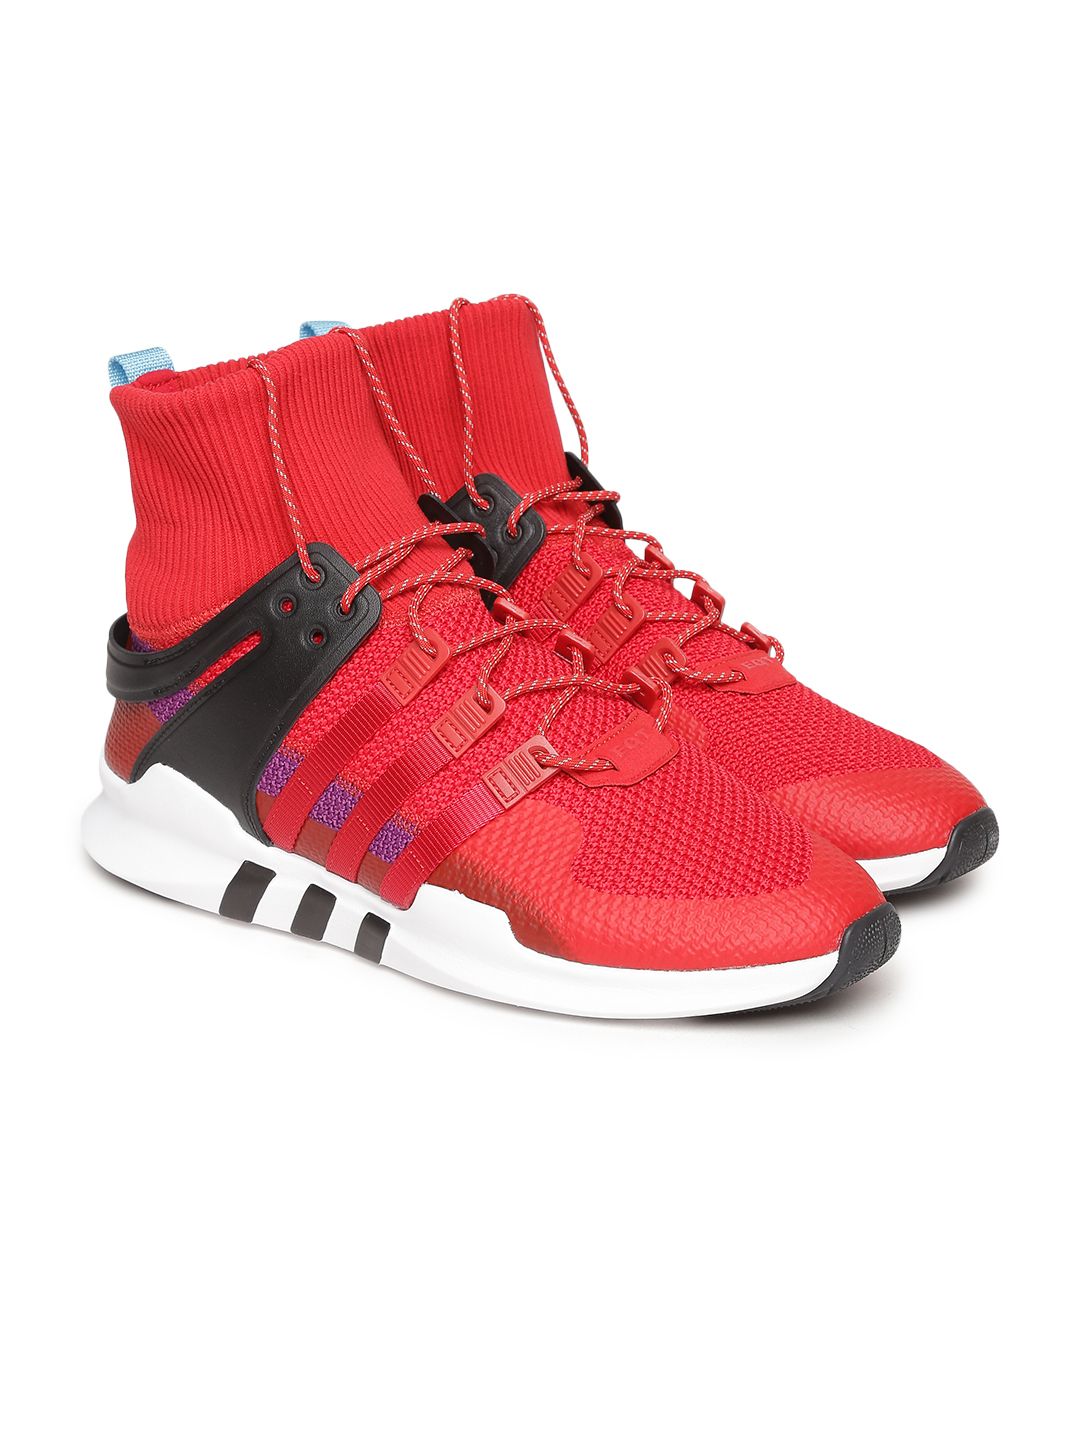 new red adidas shoes